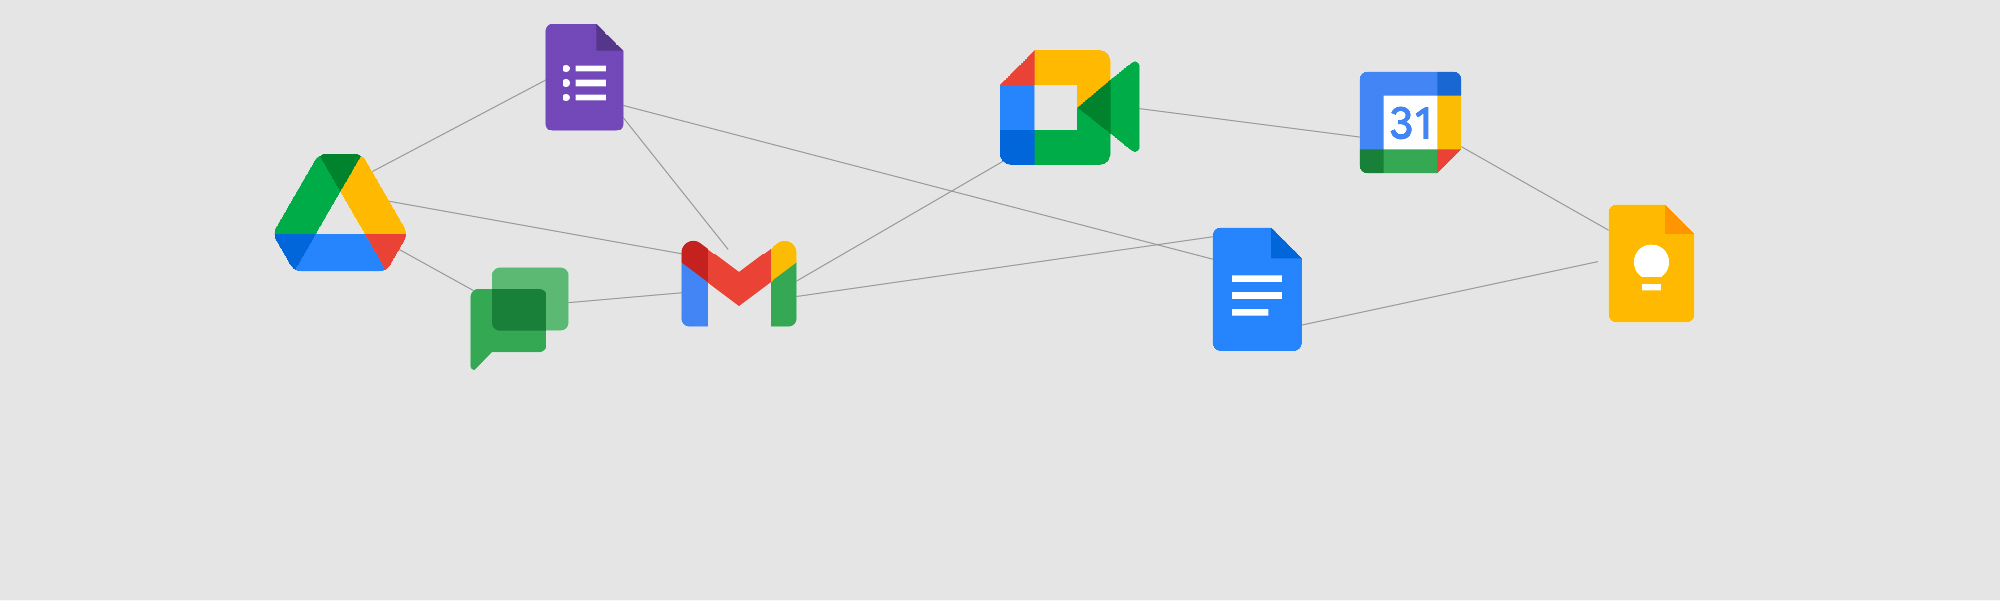 Google Workspace services icons connected together in a web like form